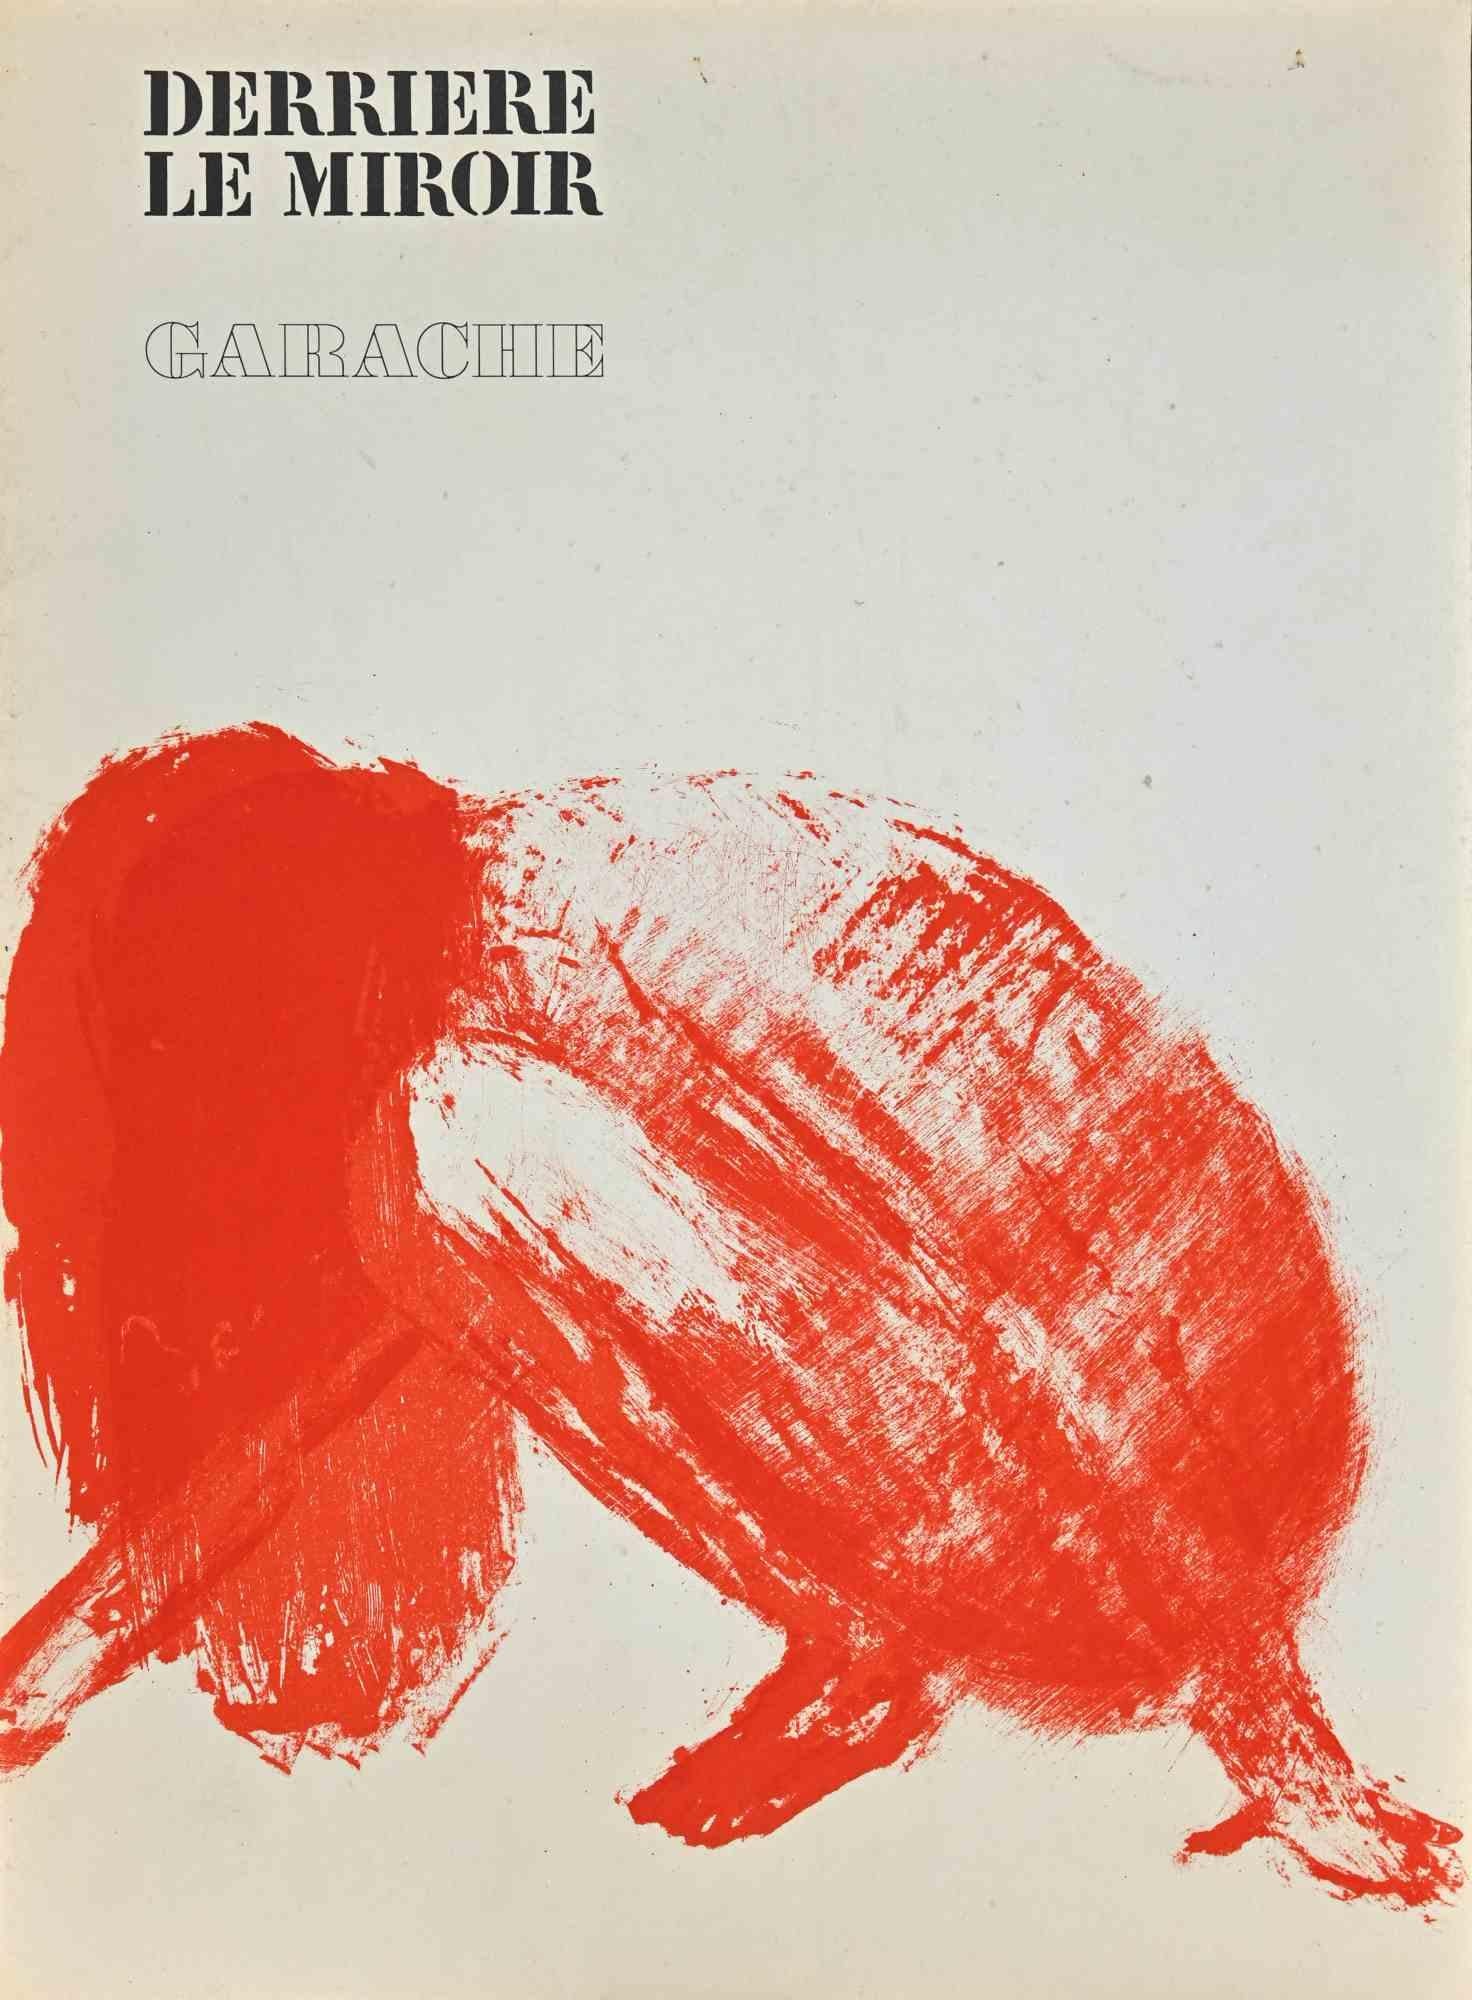 Woman is a vintage Lithograph realized by Claude Garache in the 1975.

Derrière Le Miroir at the top.

Maeght Editor, France on the rear.

Good conditions.

The art work is depicted through confident strokes with vivid bright red.